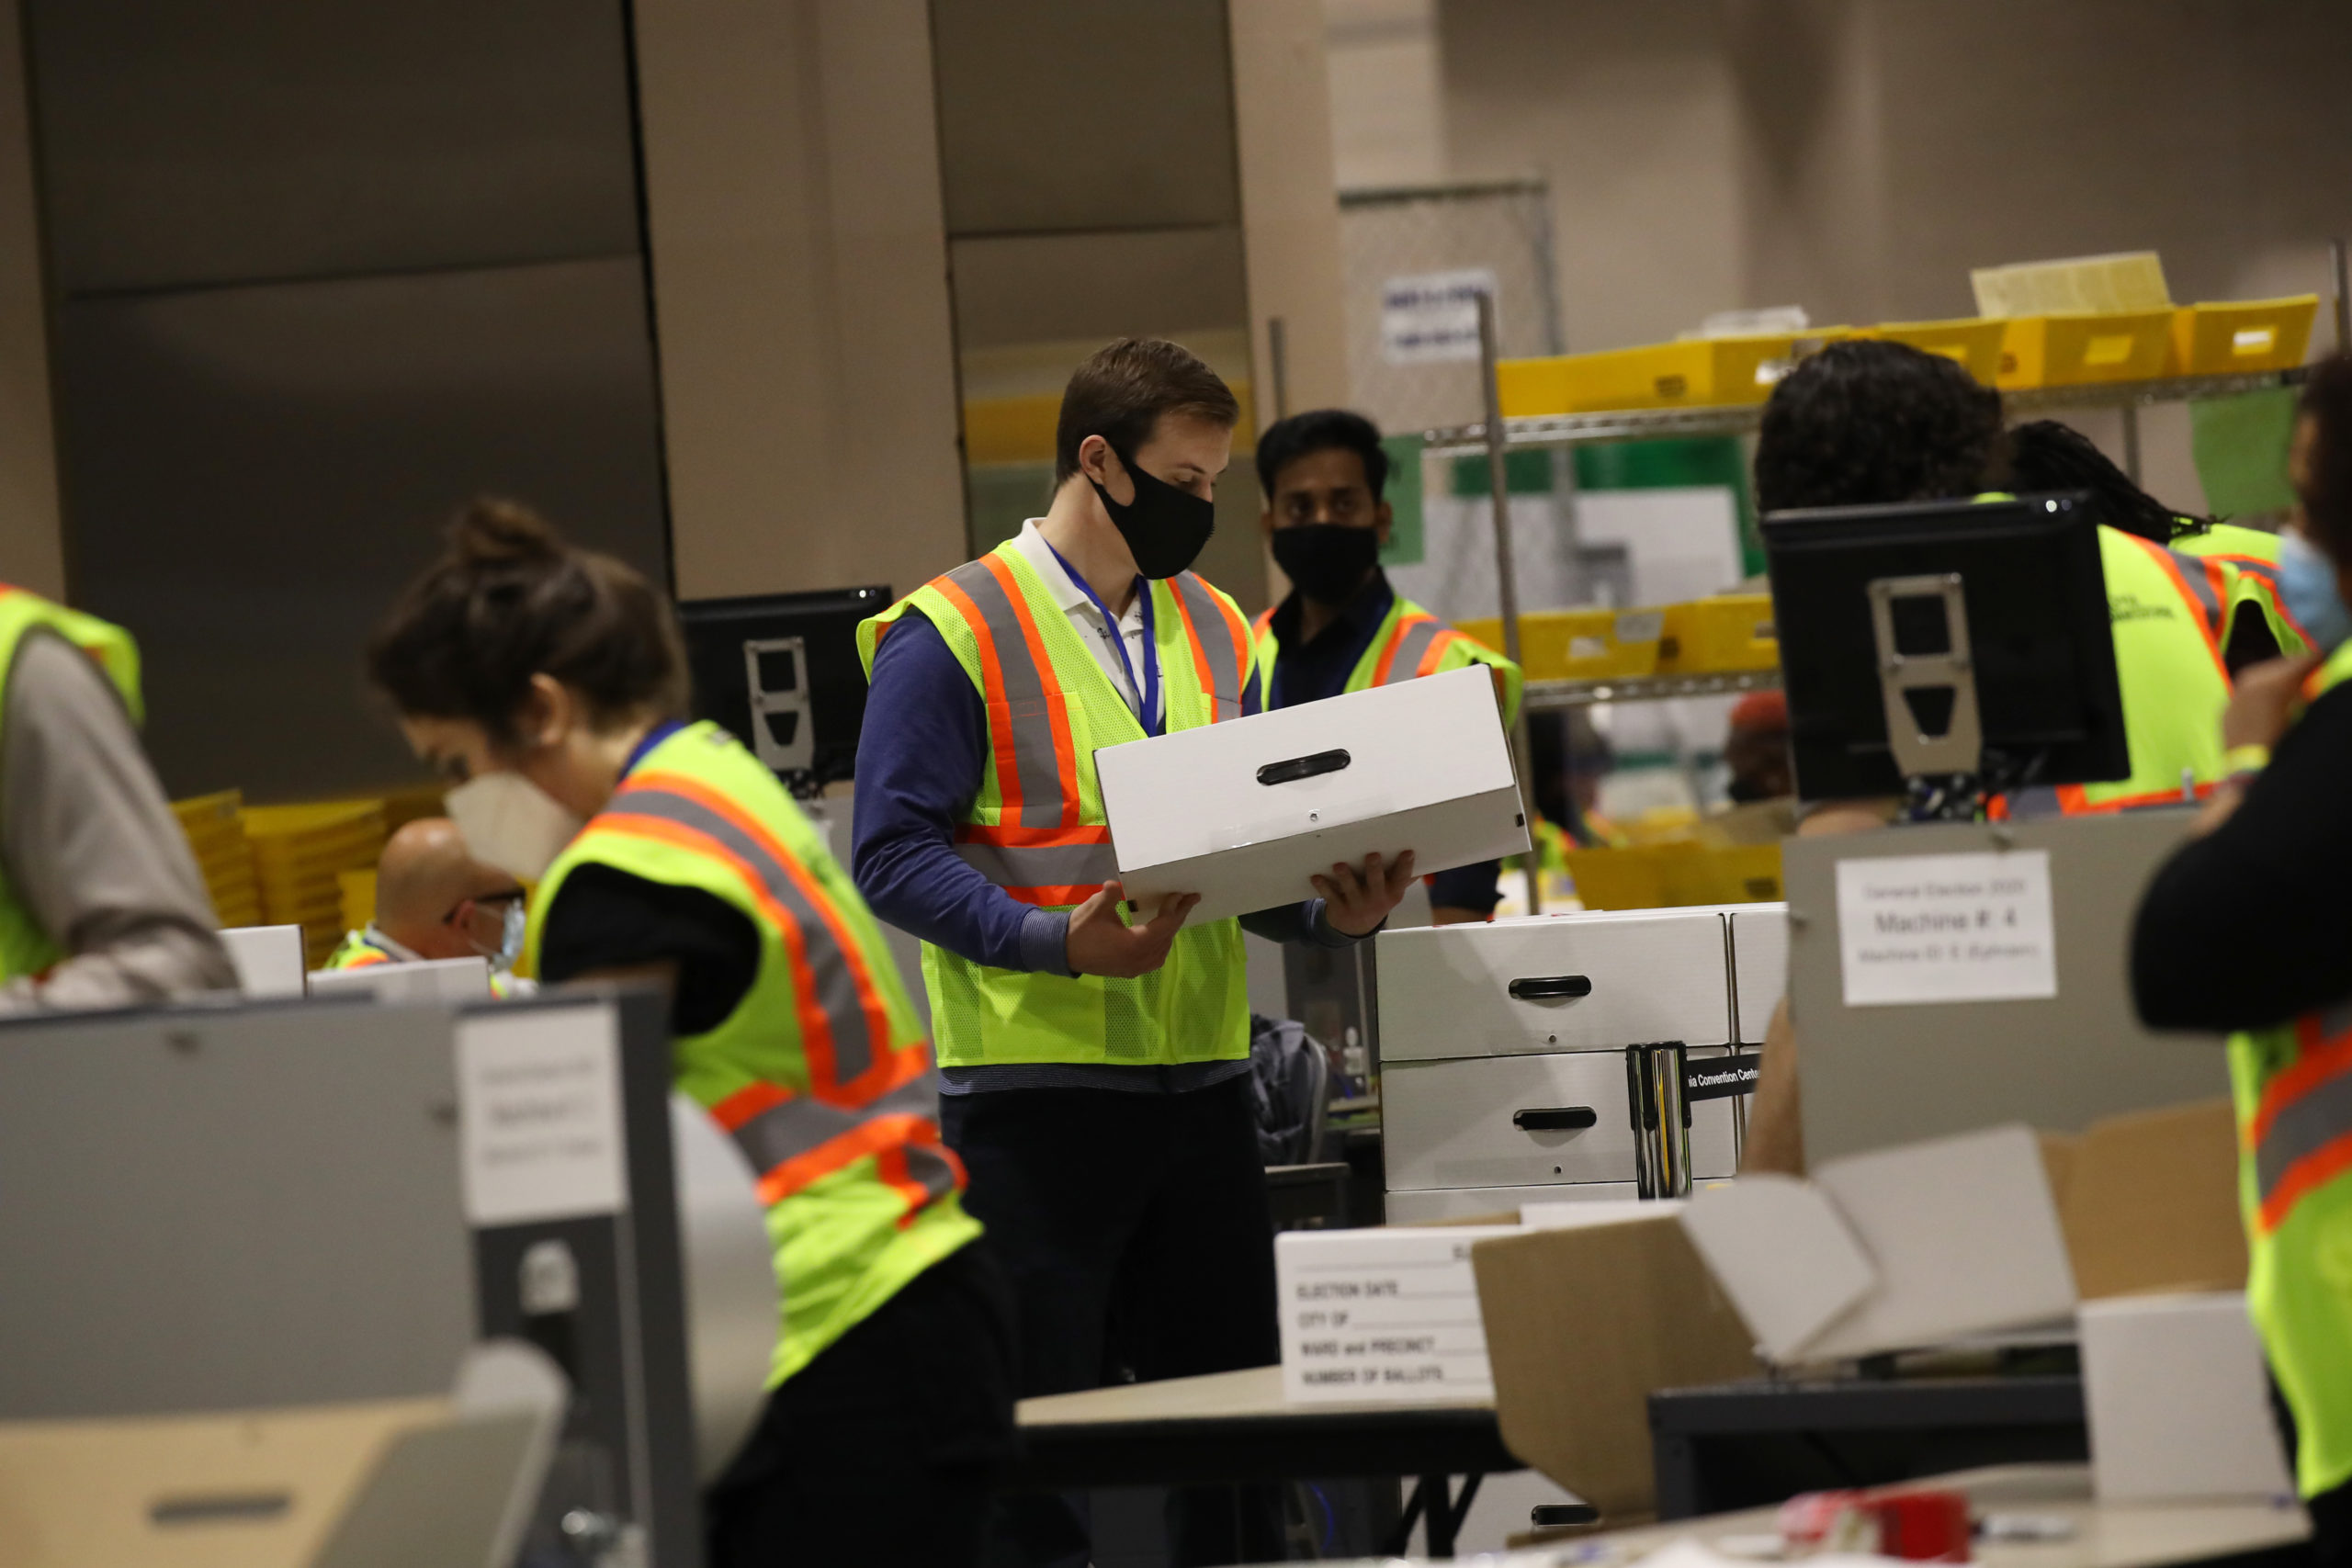 Election workers count ballots on Wednesday in Philadelphia, Pennsylvania. (Spencer Platt/Getty Images)